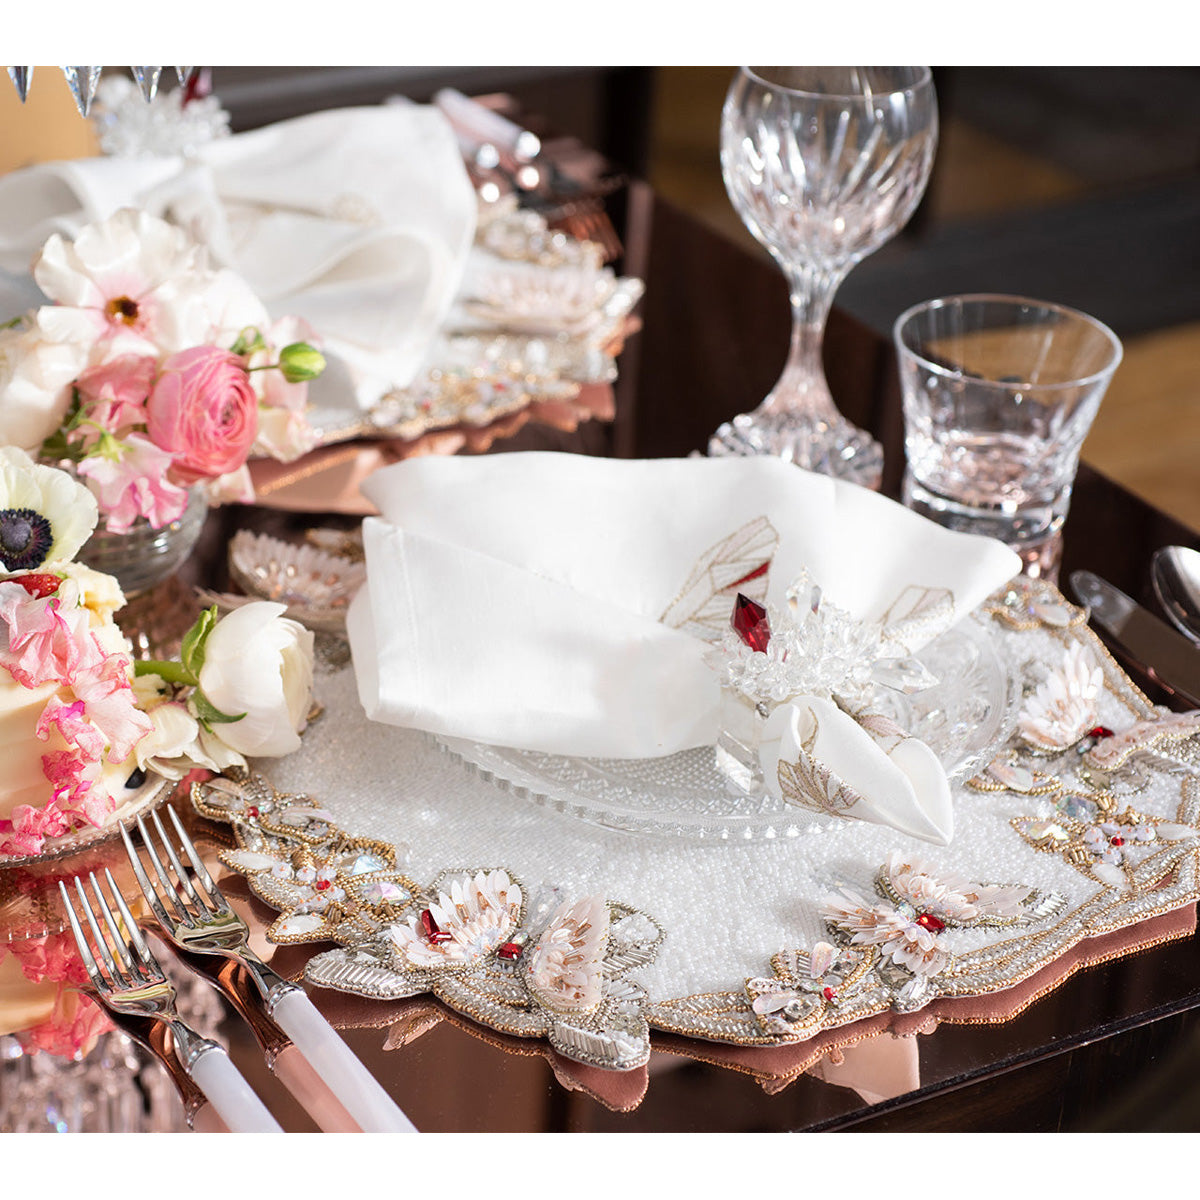 Diamant Butterflies Placemat in White & Blush - Set of 2 in a Gift Box by Kim Seybert Additional Image-3